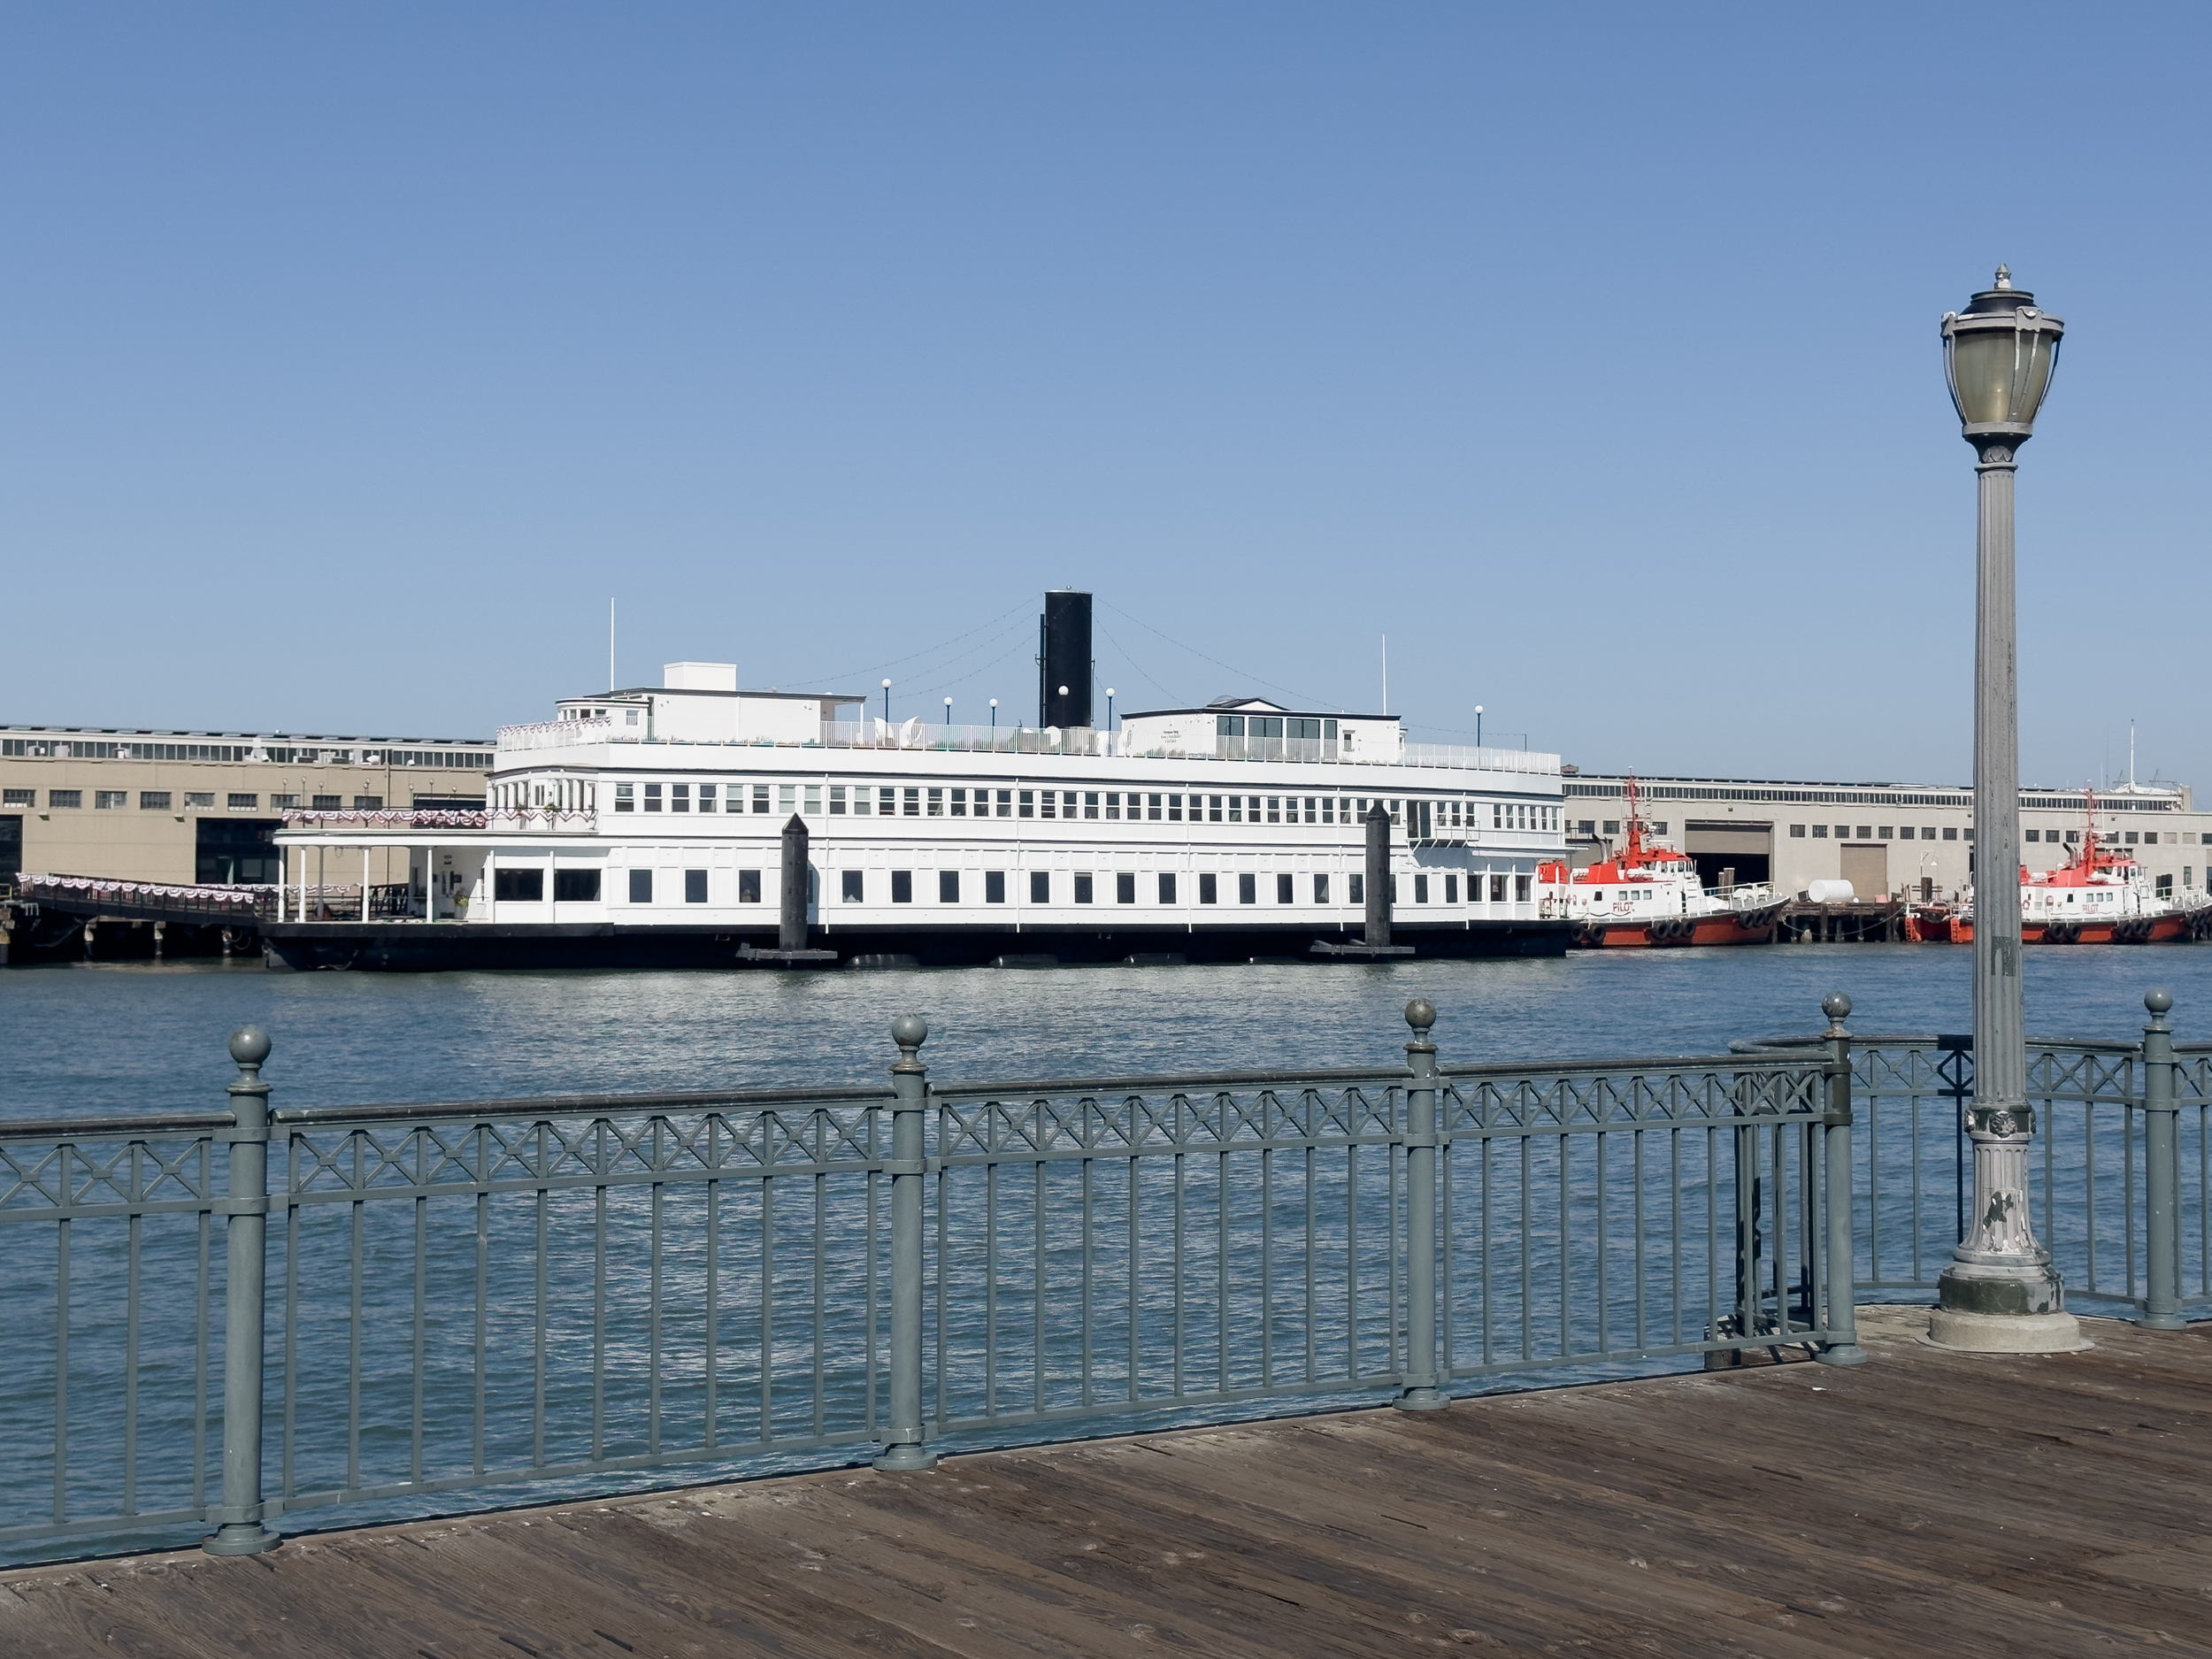 Klamath Ferry Boat seen from Pier 7, image by Andrew Campbell Nelson